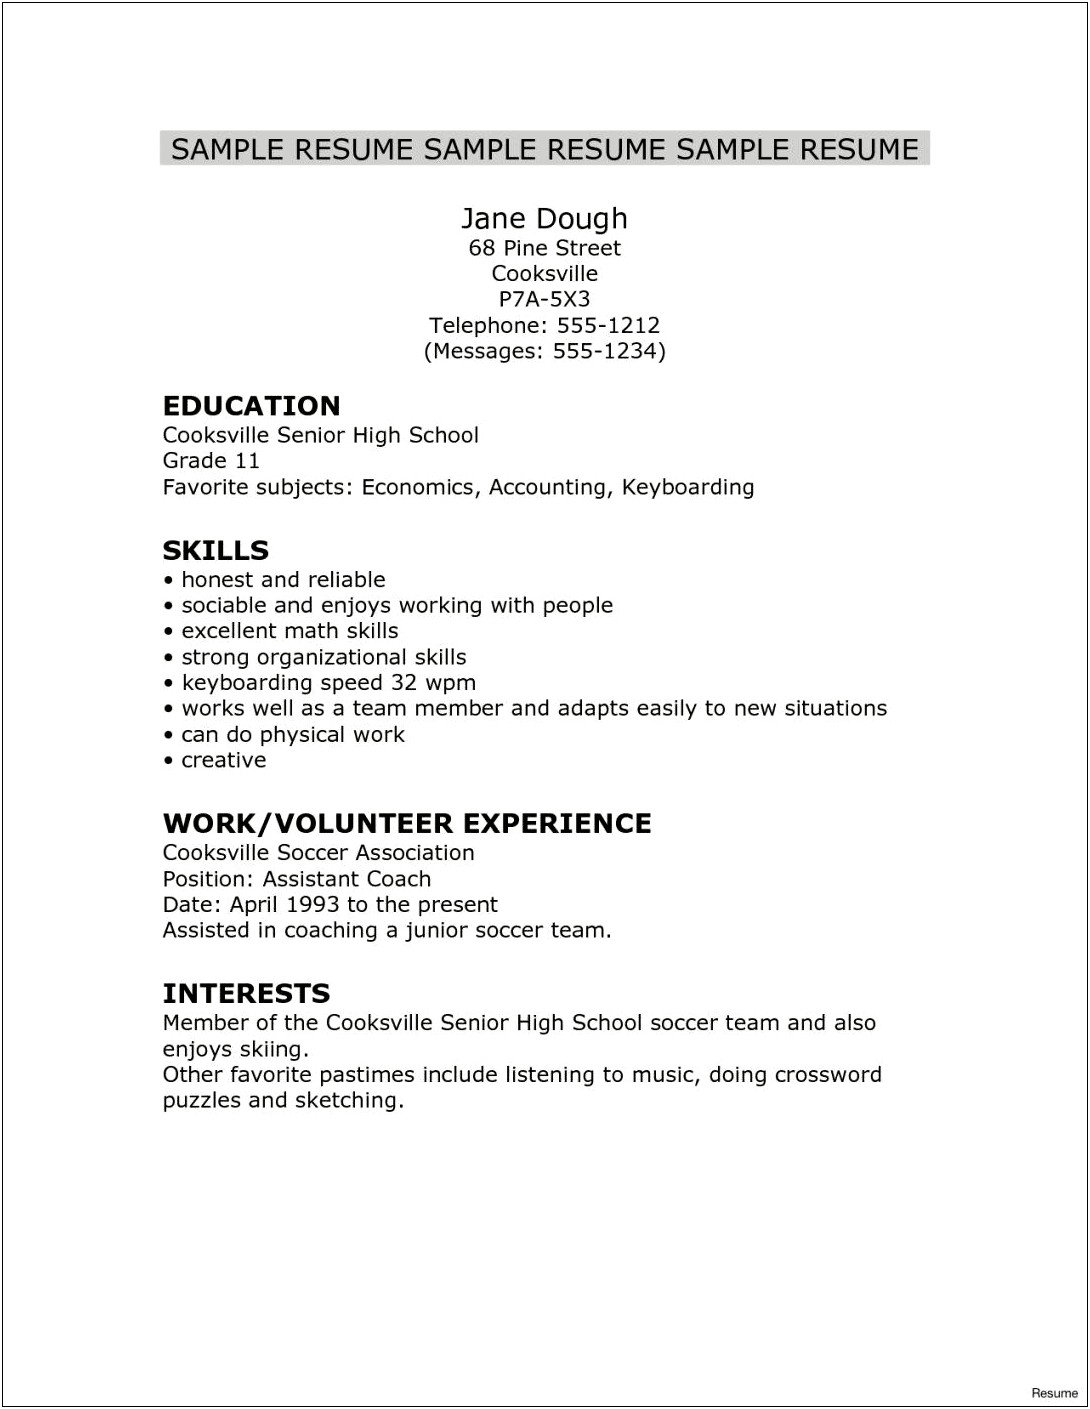 Sample Resume For Highschool Graduate With Little Experience